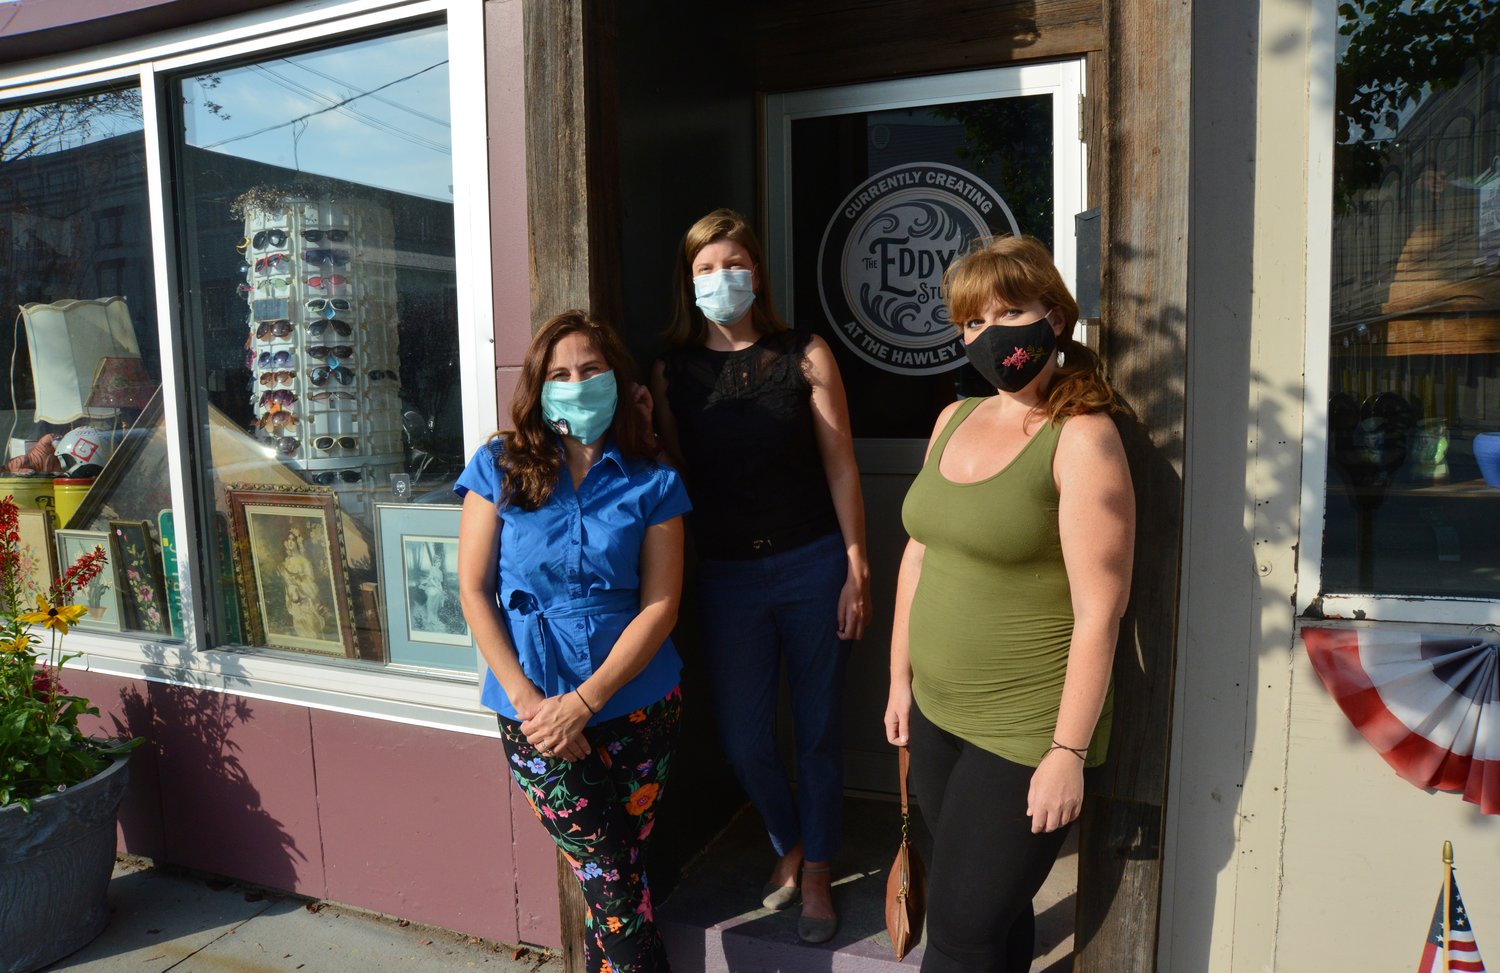 Alison Hoffmann, left, Sarah Clauss and Jill Carletti stand in front of the historic Murray building on Main Avenue in Hawley, now home to their creation: the Hawley Hub.